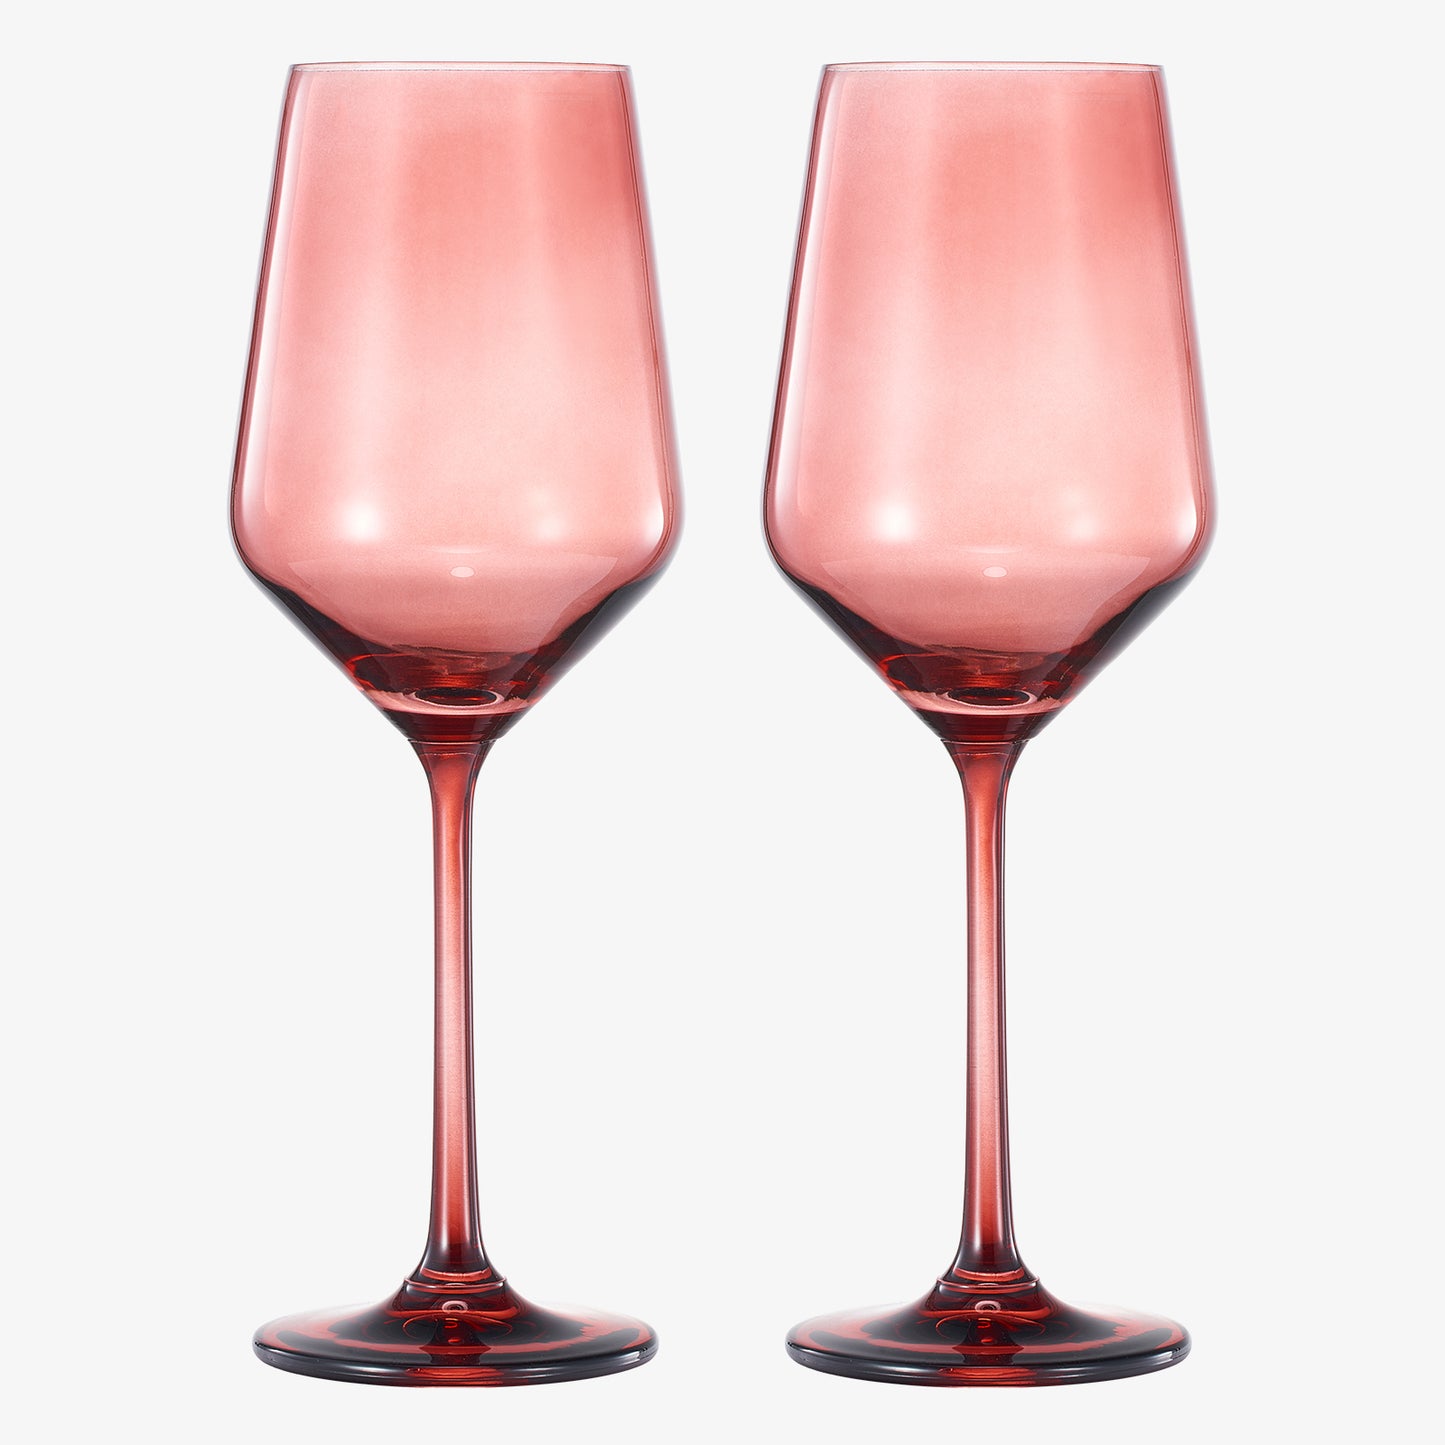 Tonal Colored Wine Glassware, Cranberry Red, Set of 2